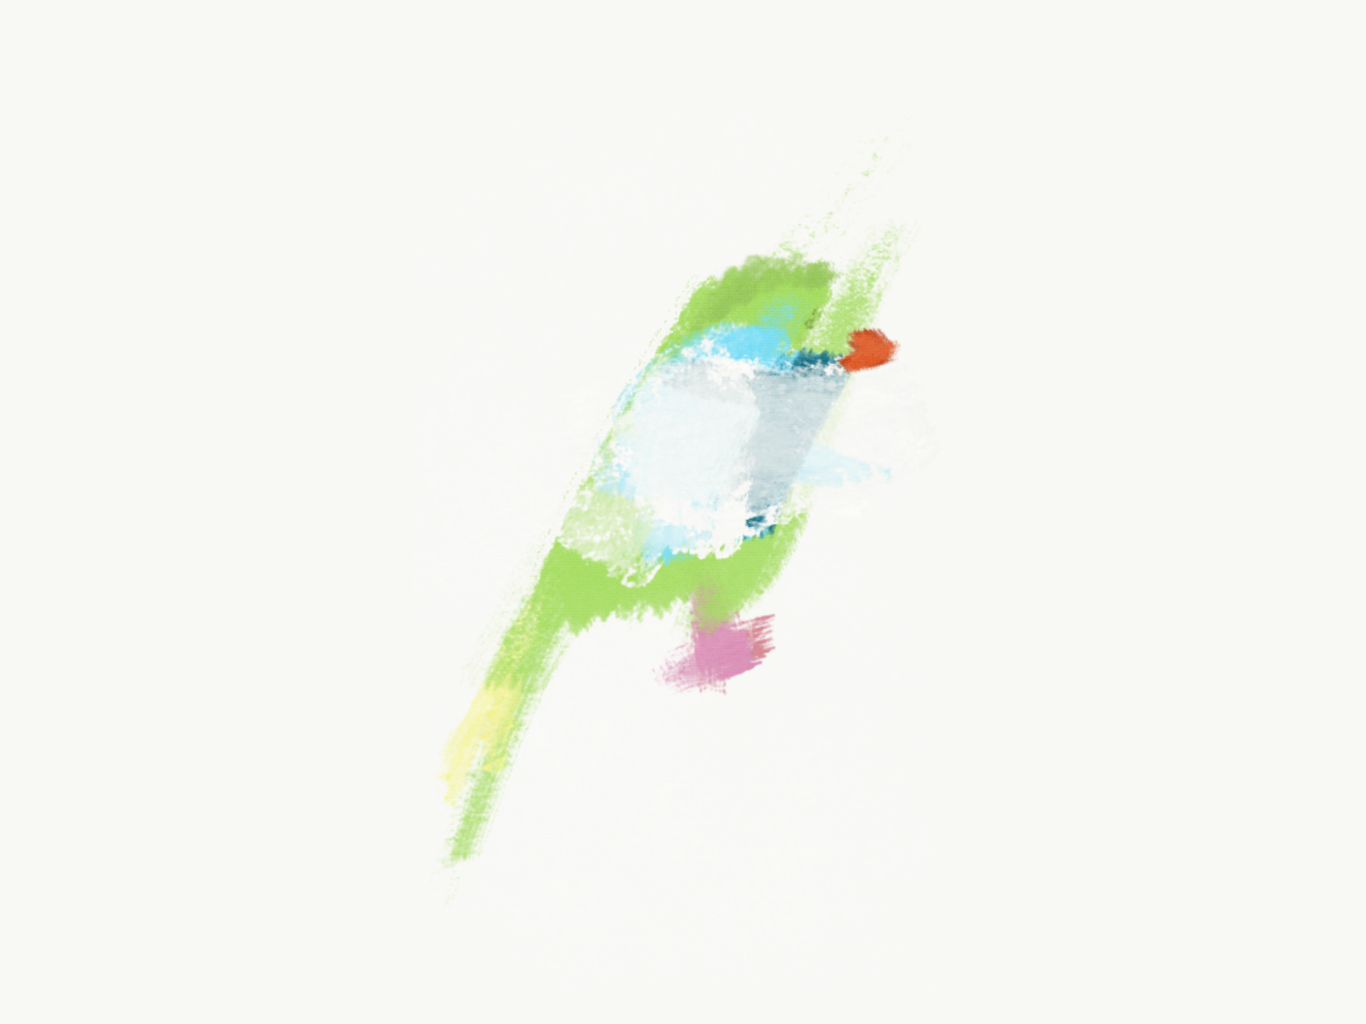 An abstract and expressive illustration of a colourful green bird